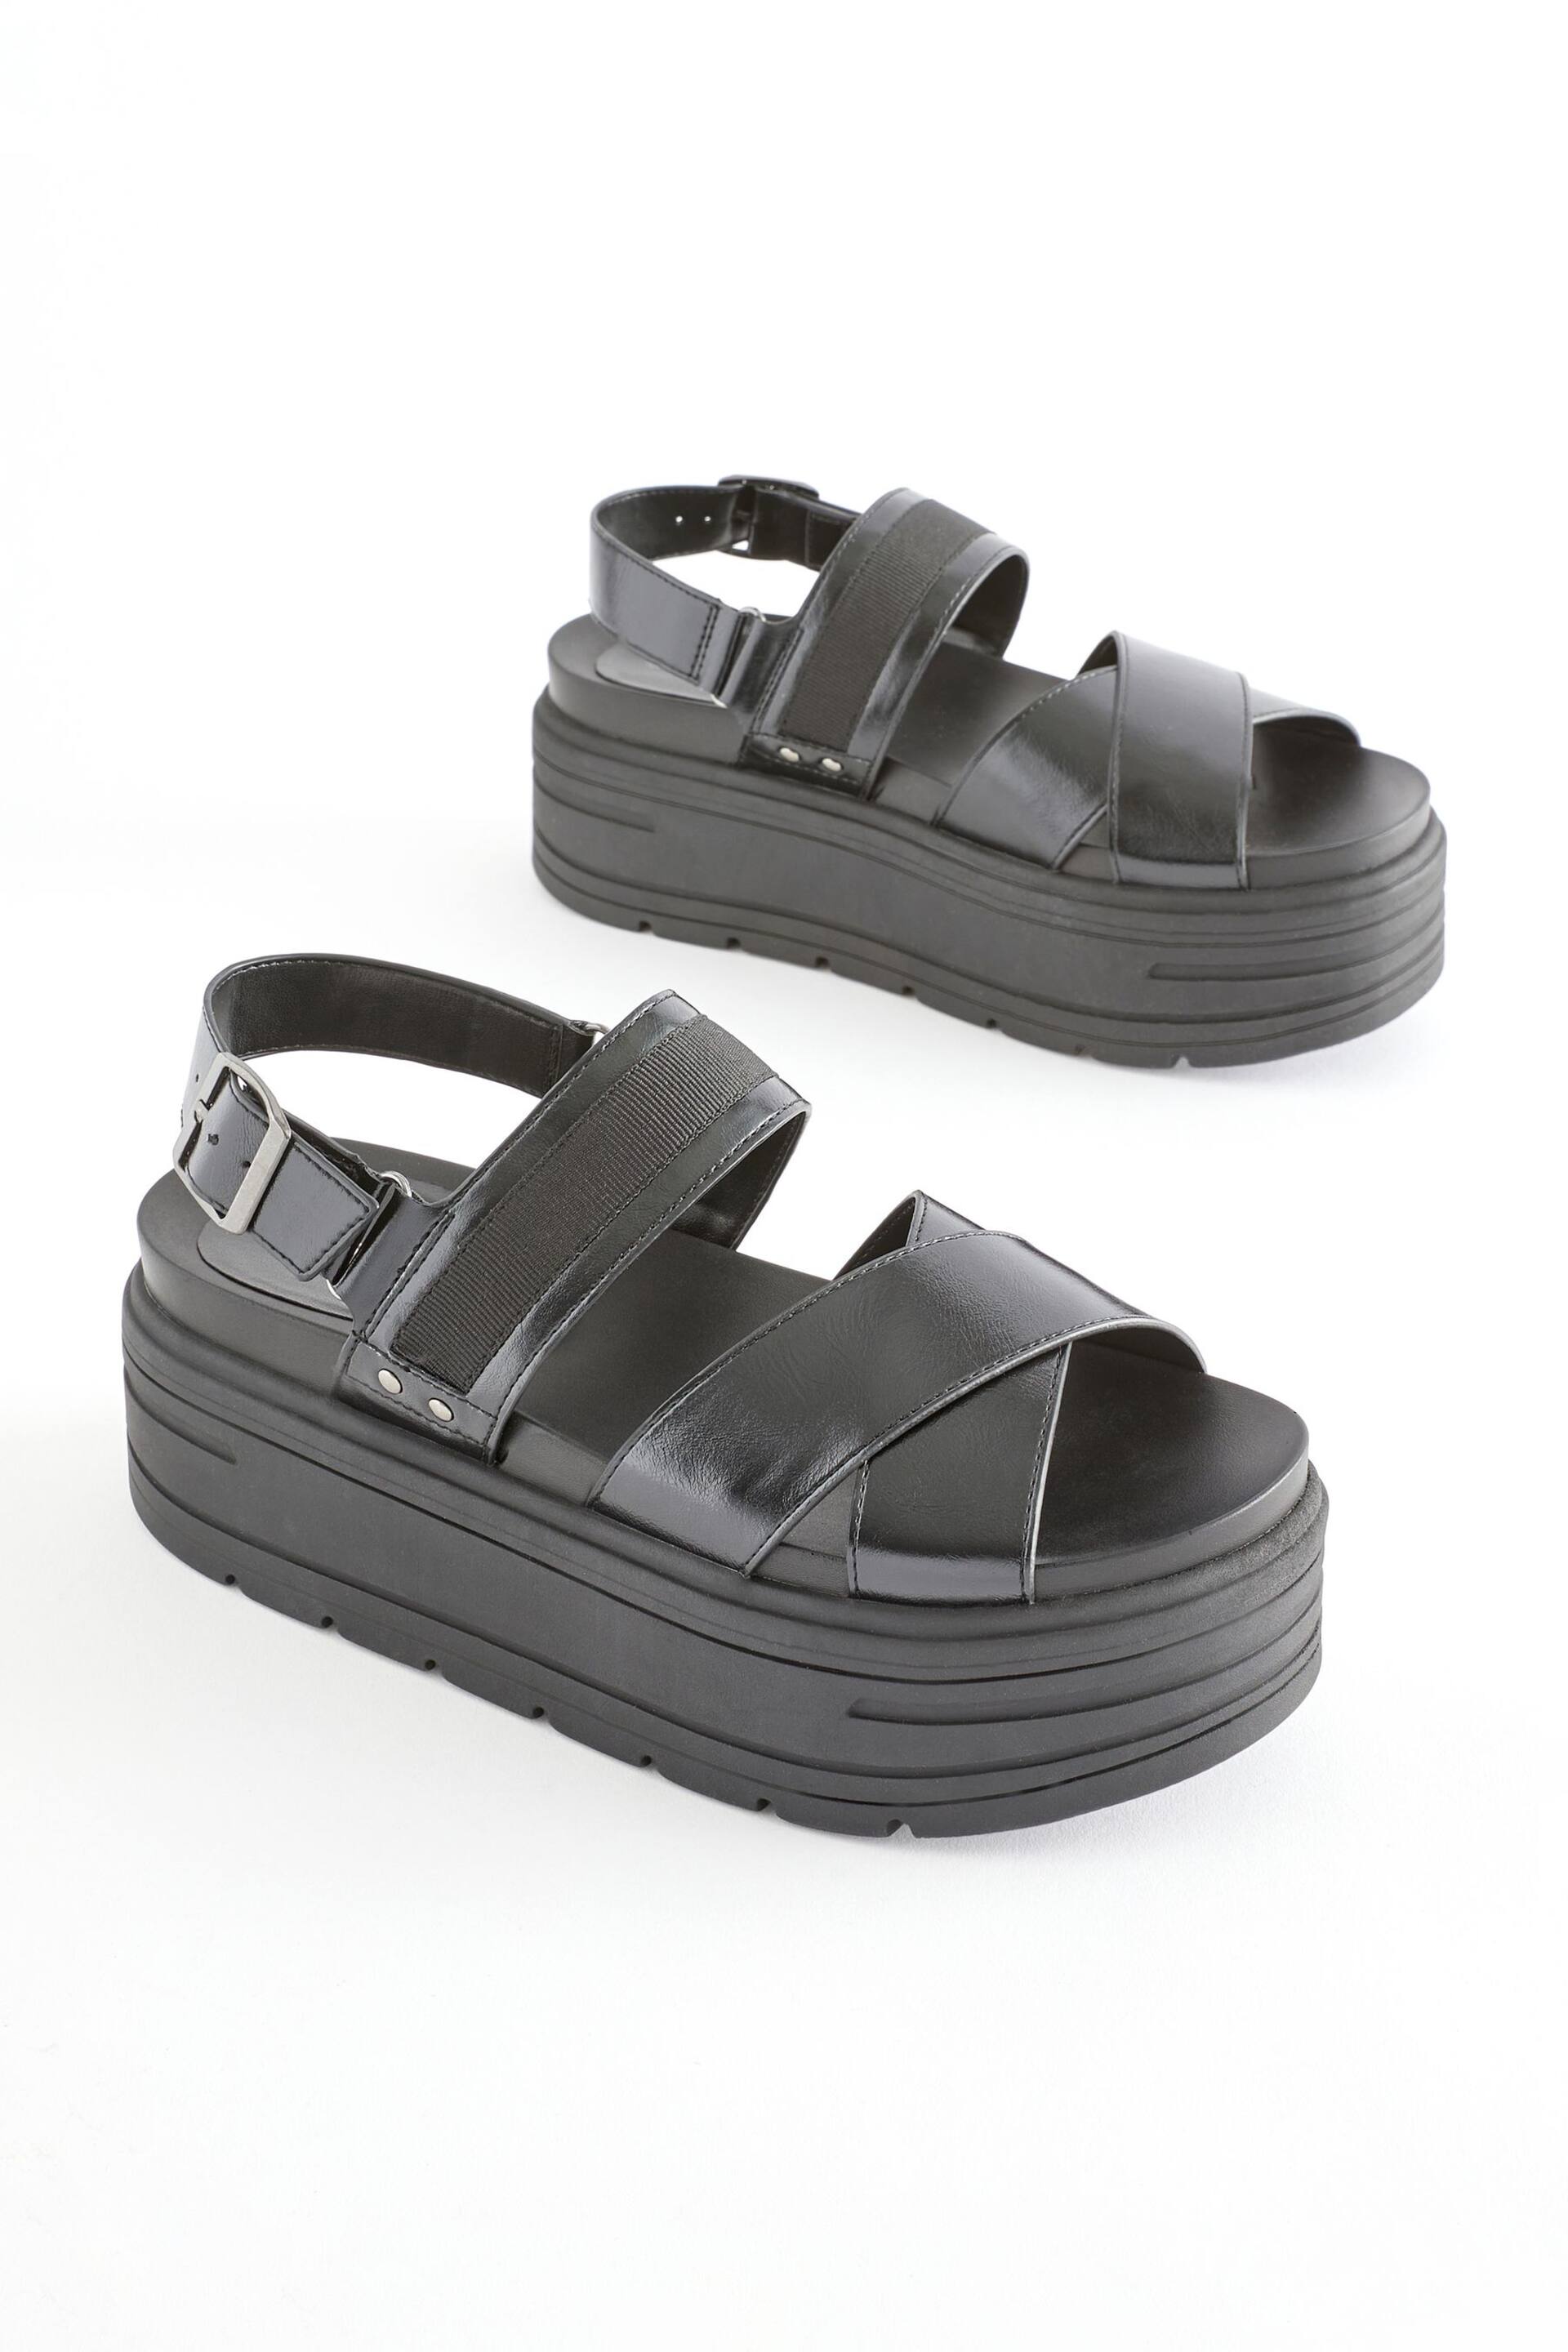 Black Regular/Wide Fit Chunky Wedge Sandals - Image 1 of 6